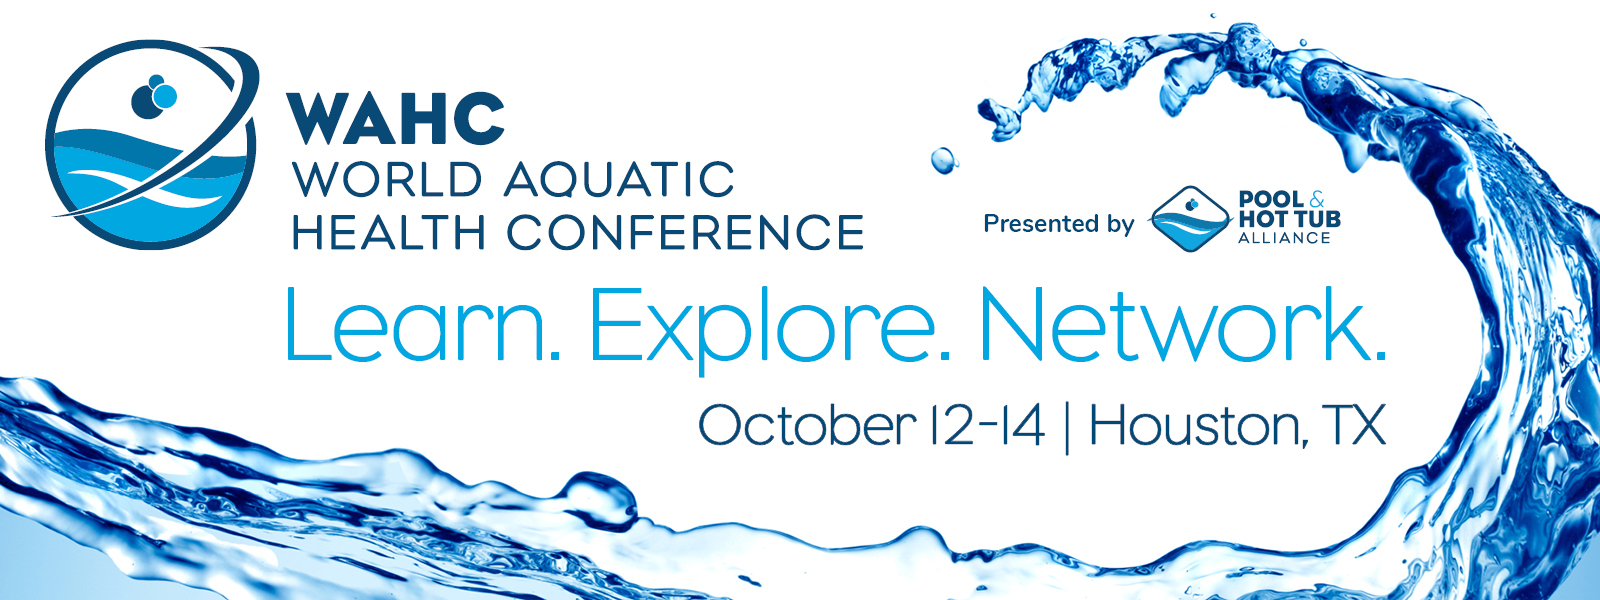 World Aquatic Health Conference Pool and Hot Tub Alliance of North